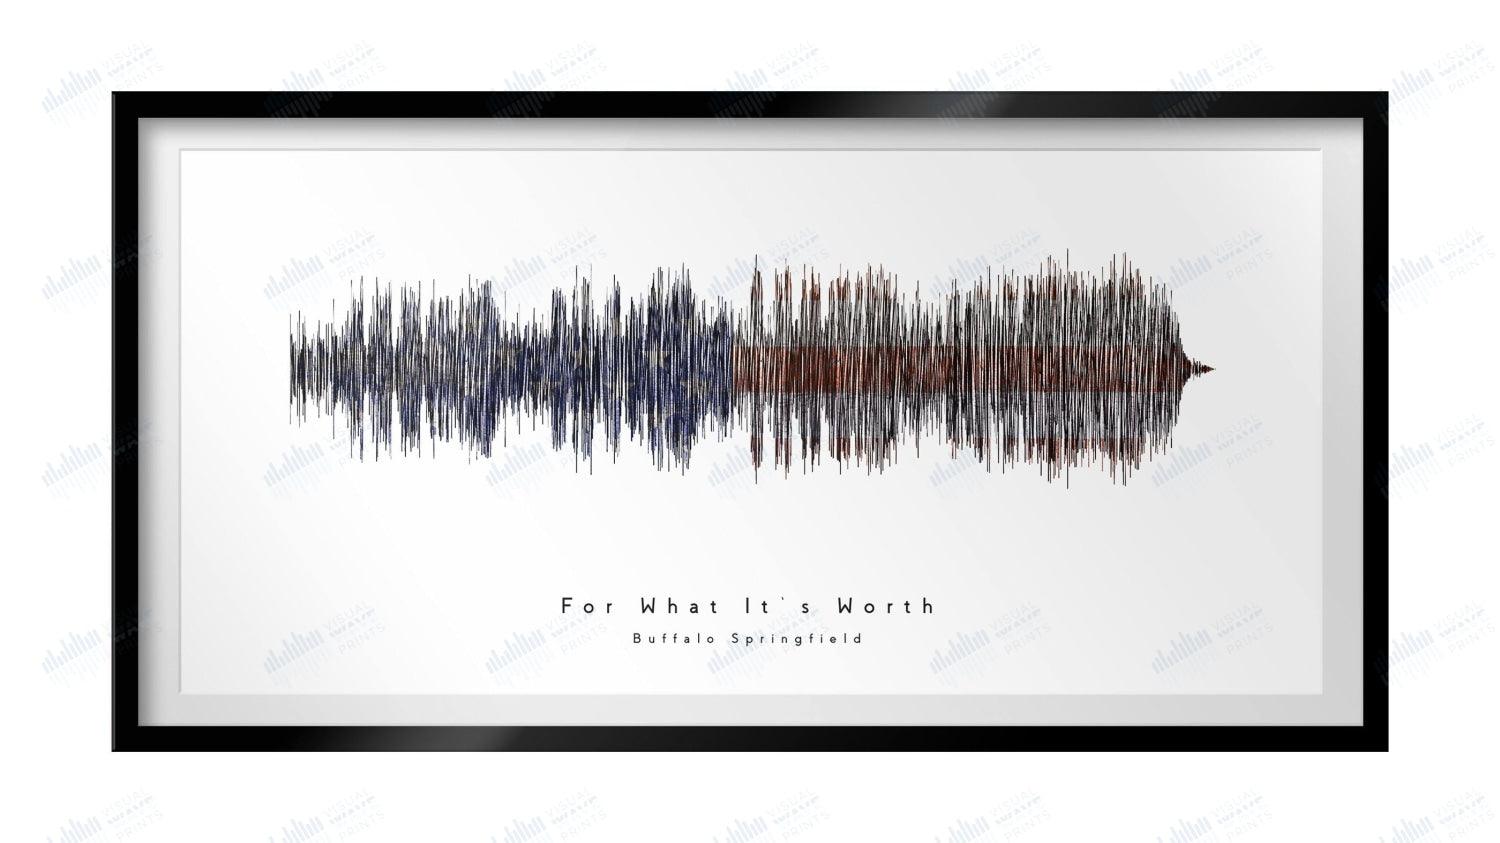 For What It's Worth by Buffalo Springfield - Visual Wave Prints